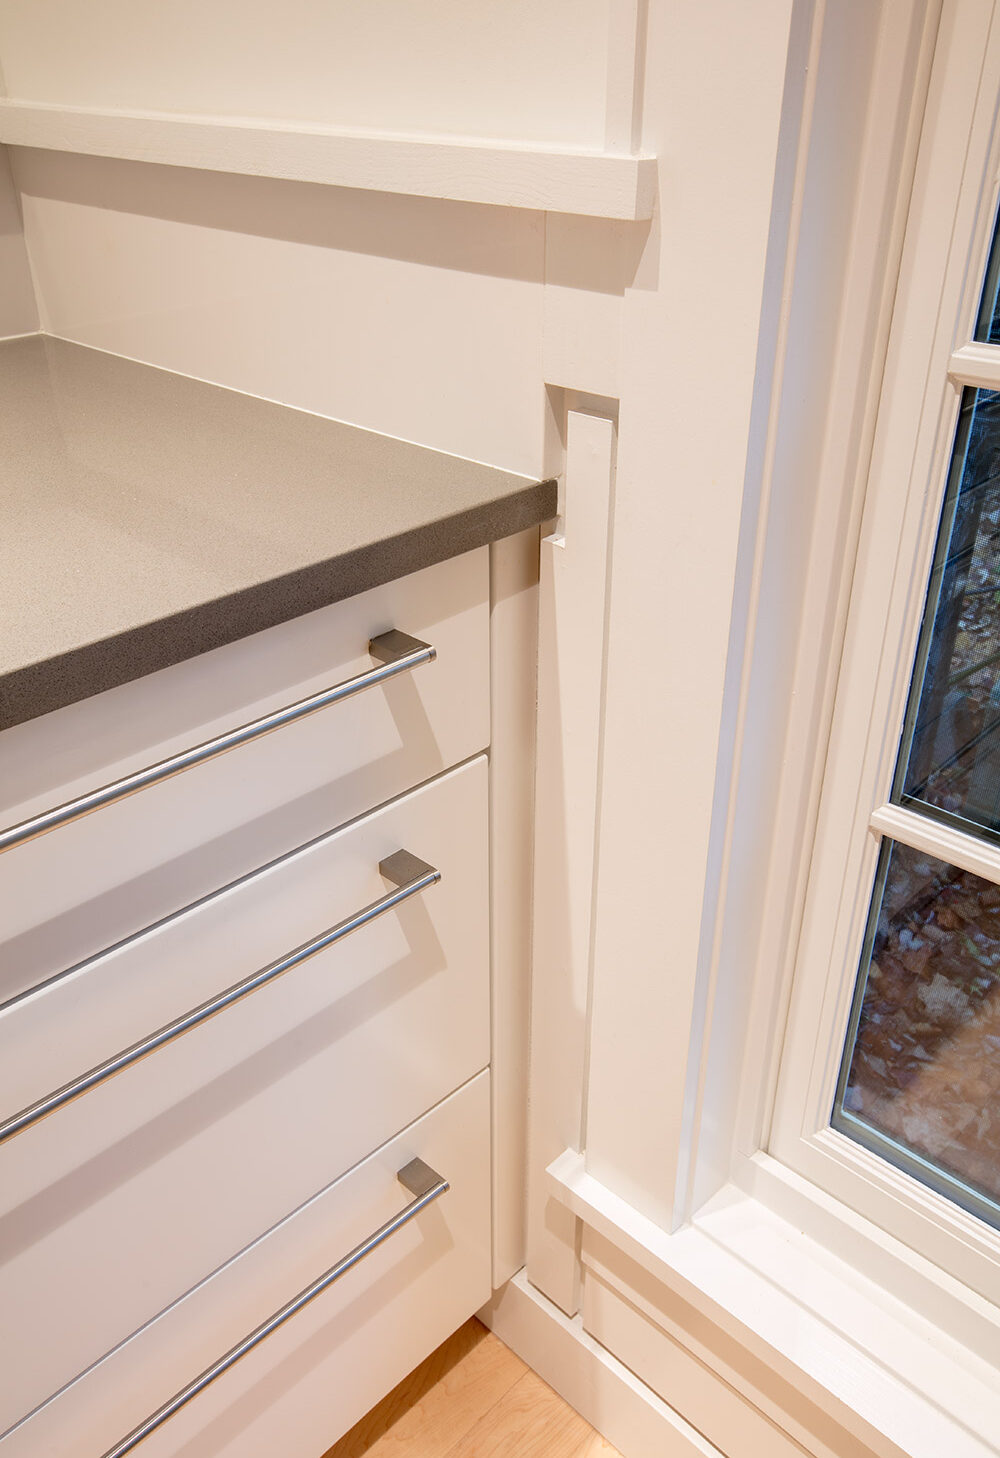 up close of modern kitchen drawers with brushed silver hardware